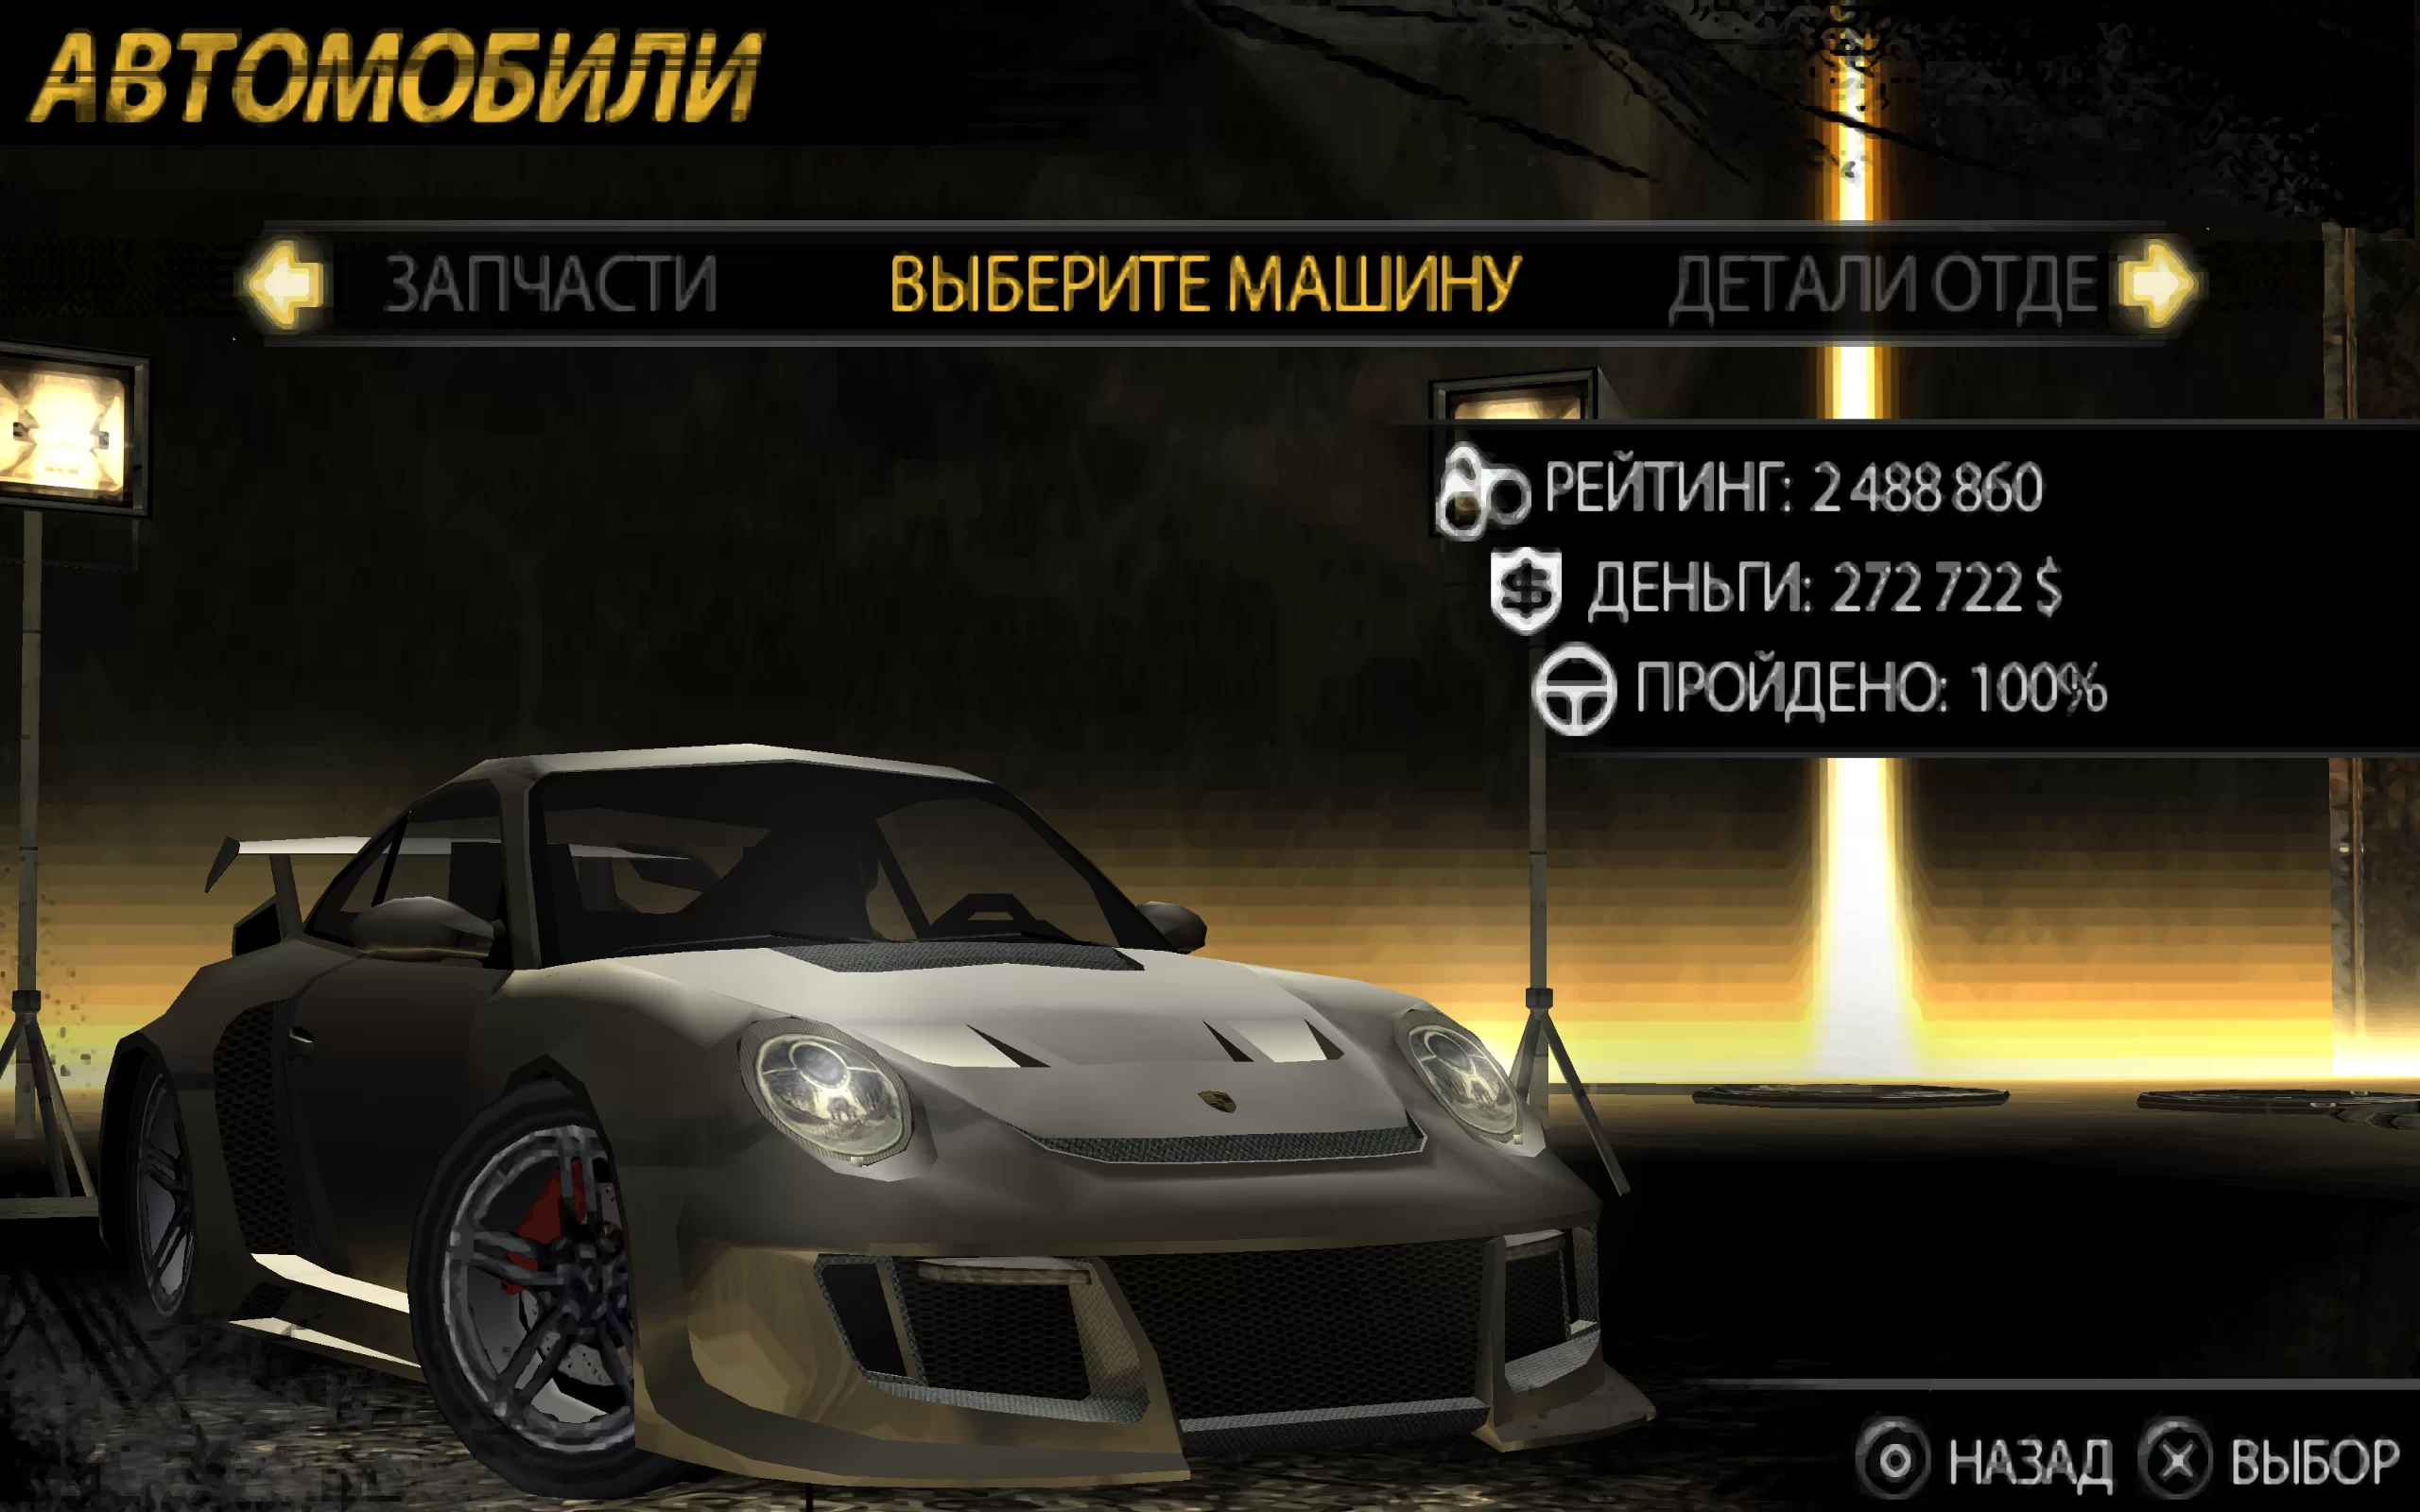 Need for Speed: Undercover PSP (PlayStation Portable)